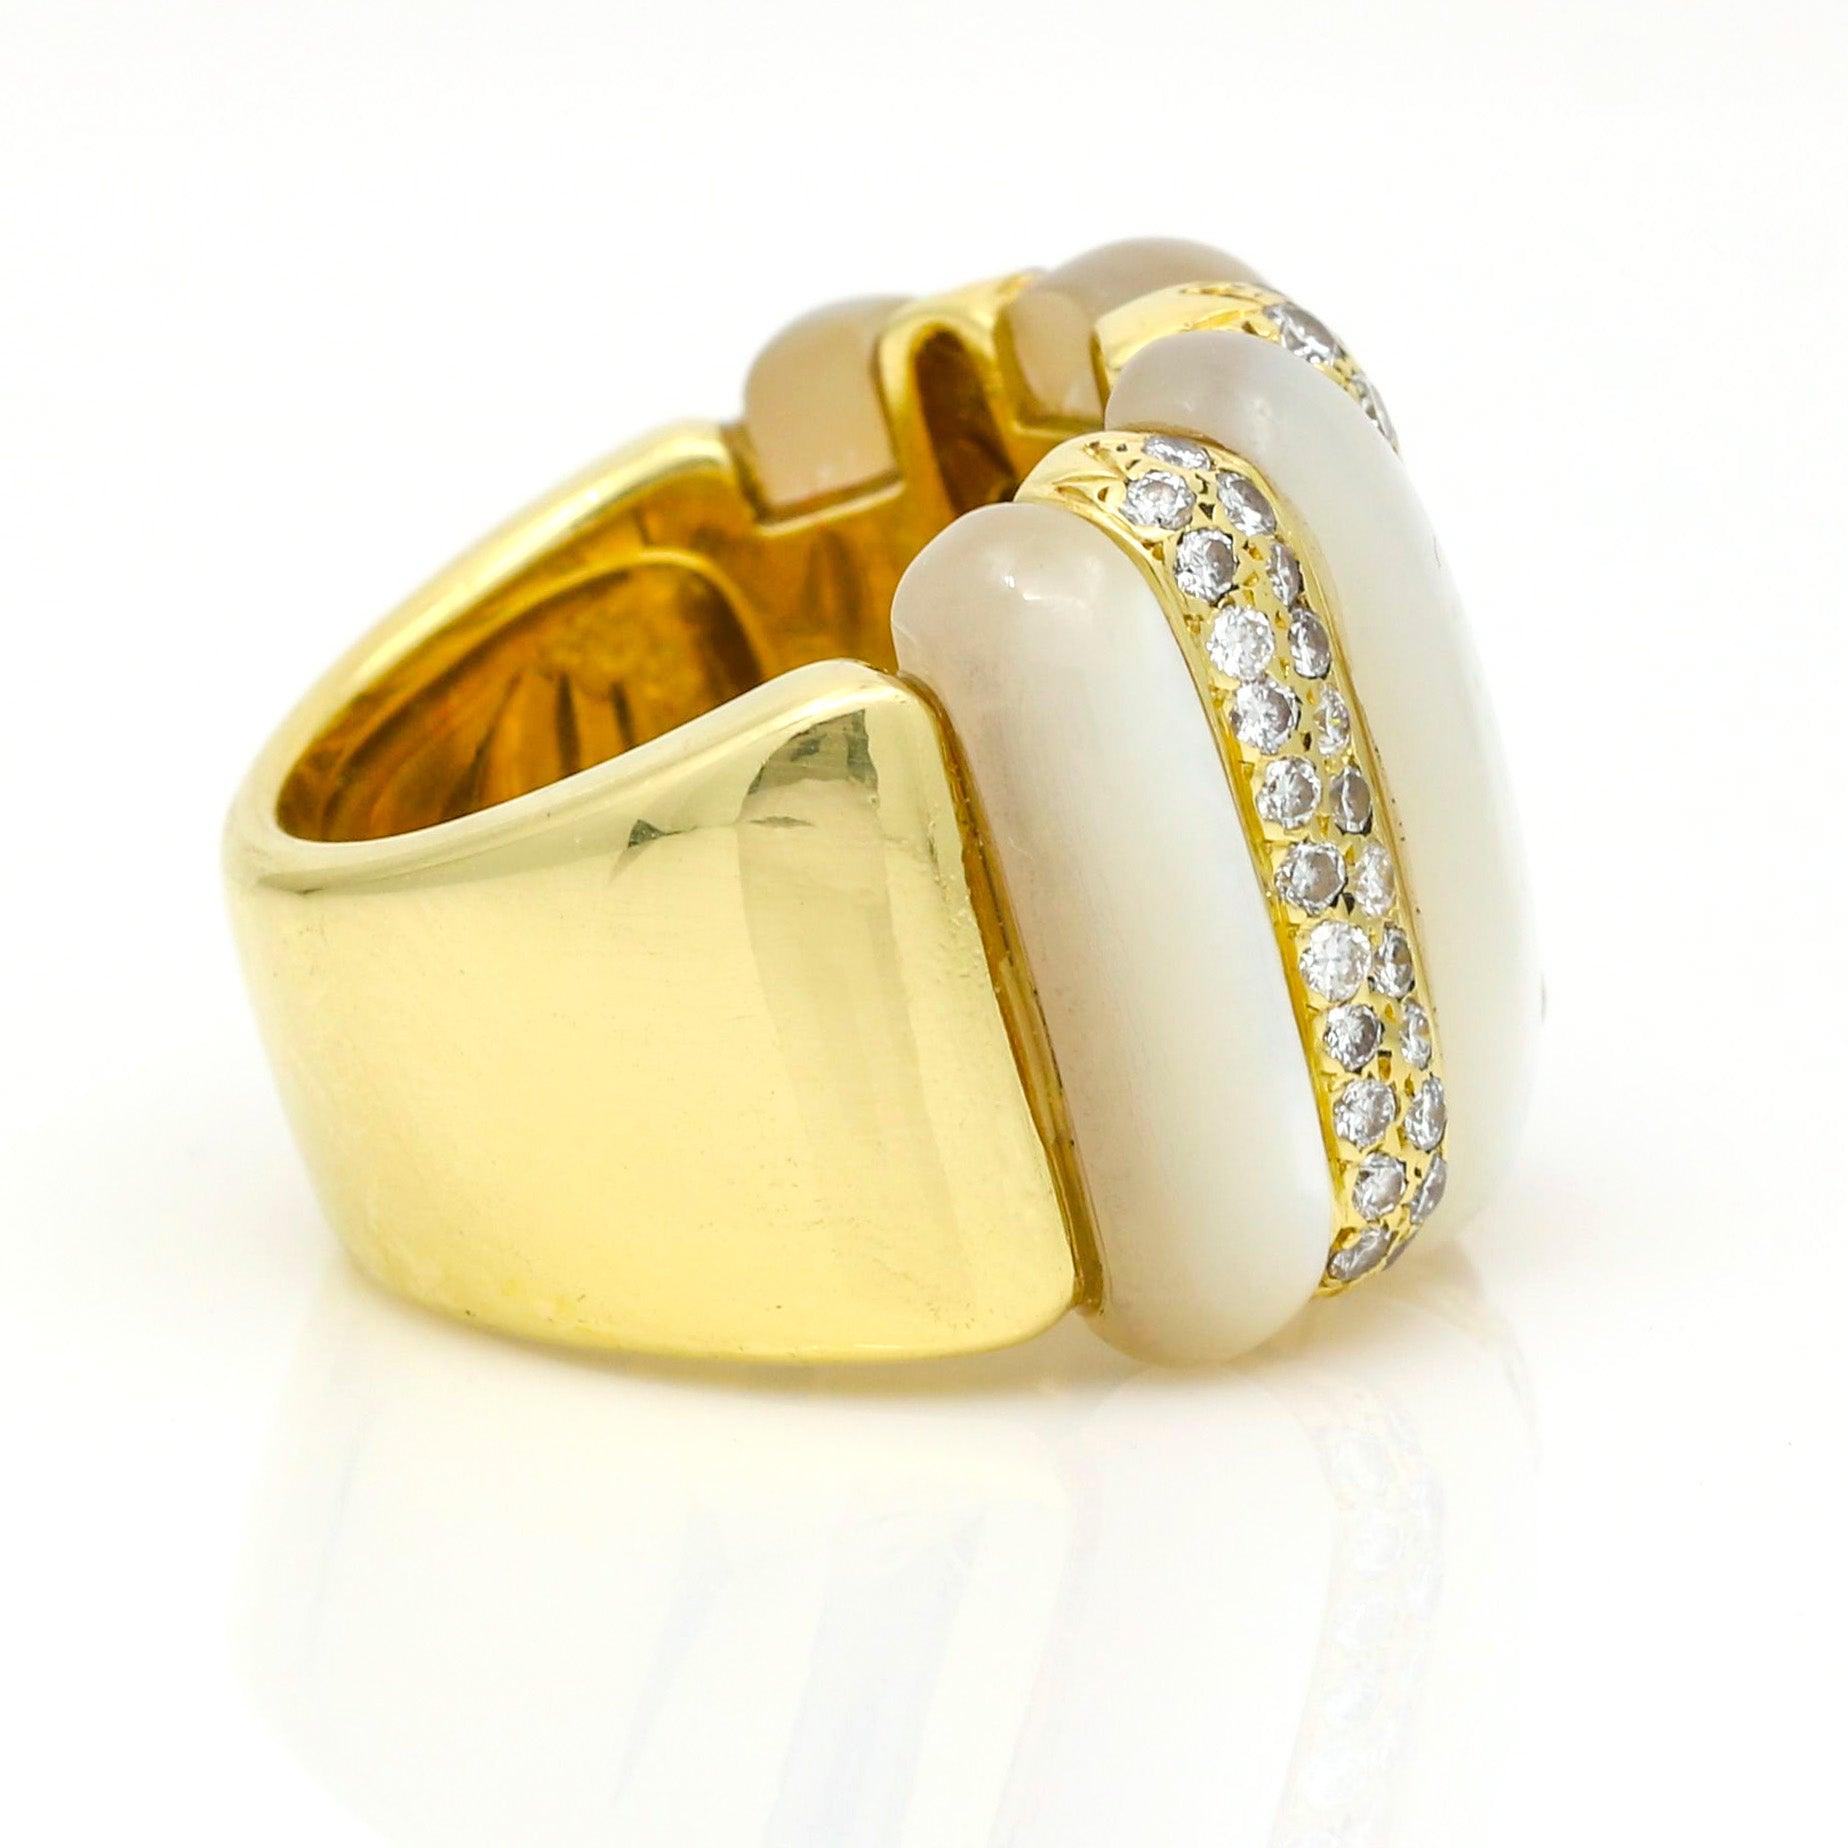 Gemlok Mother of Pearl and Diamond Statement Ring in 18k Yellow Gold - 31 Jewels Inc.